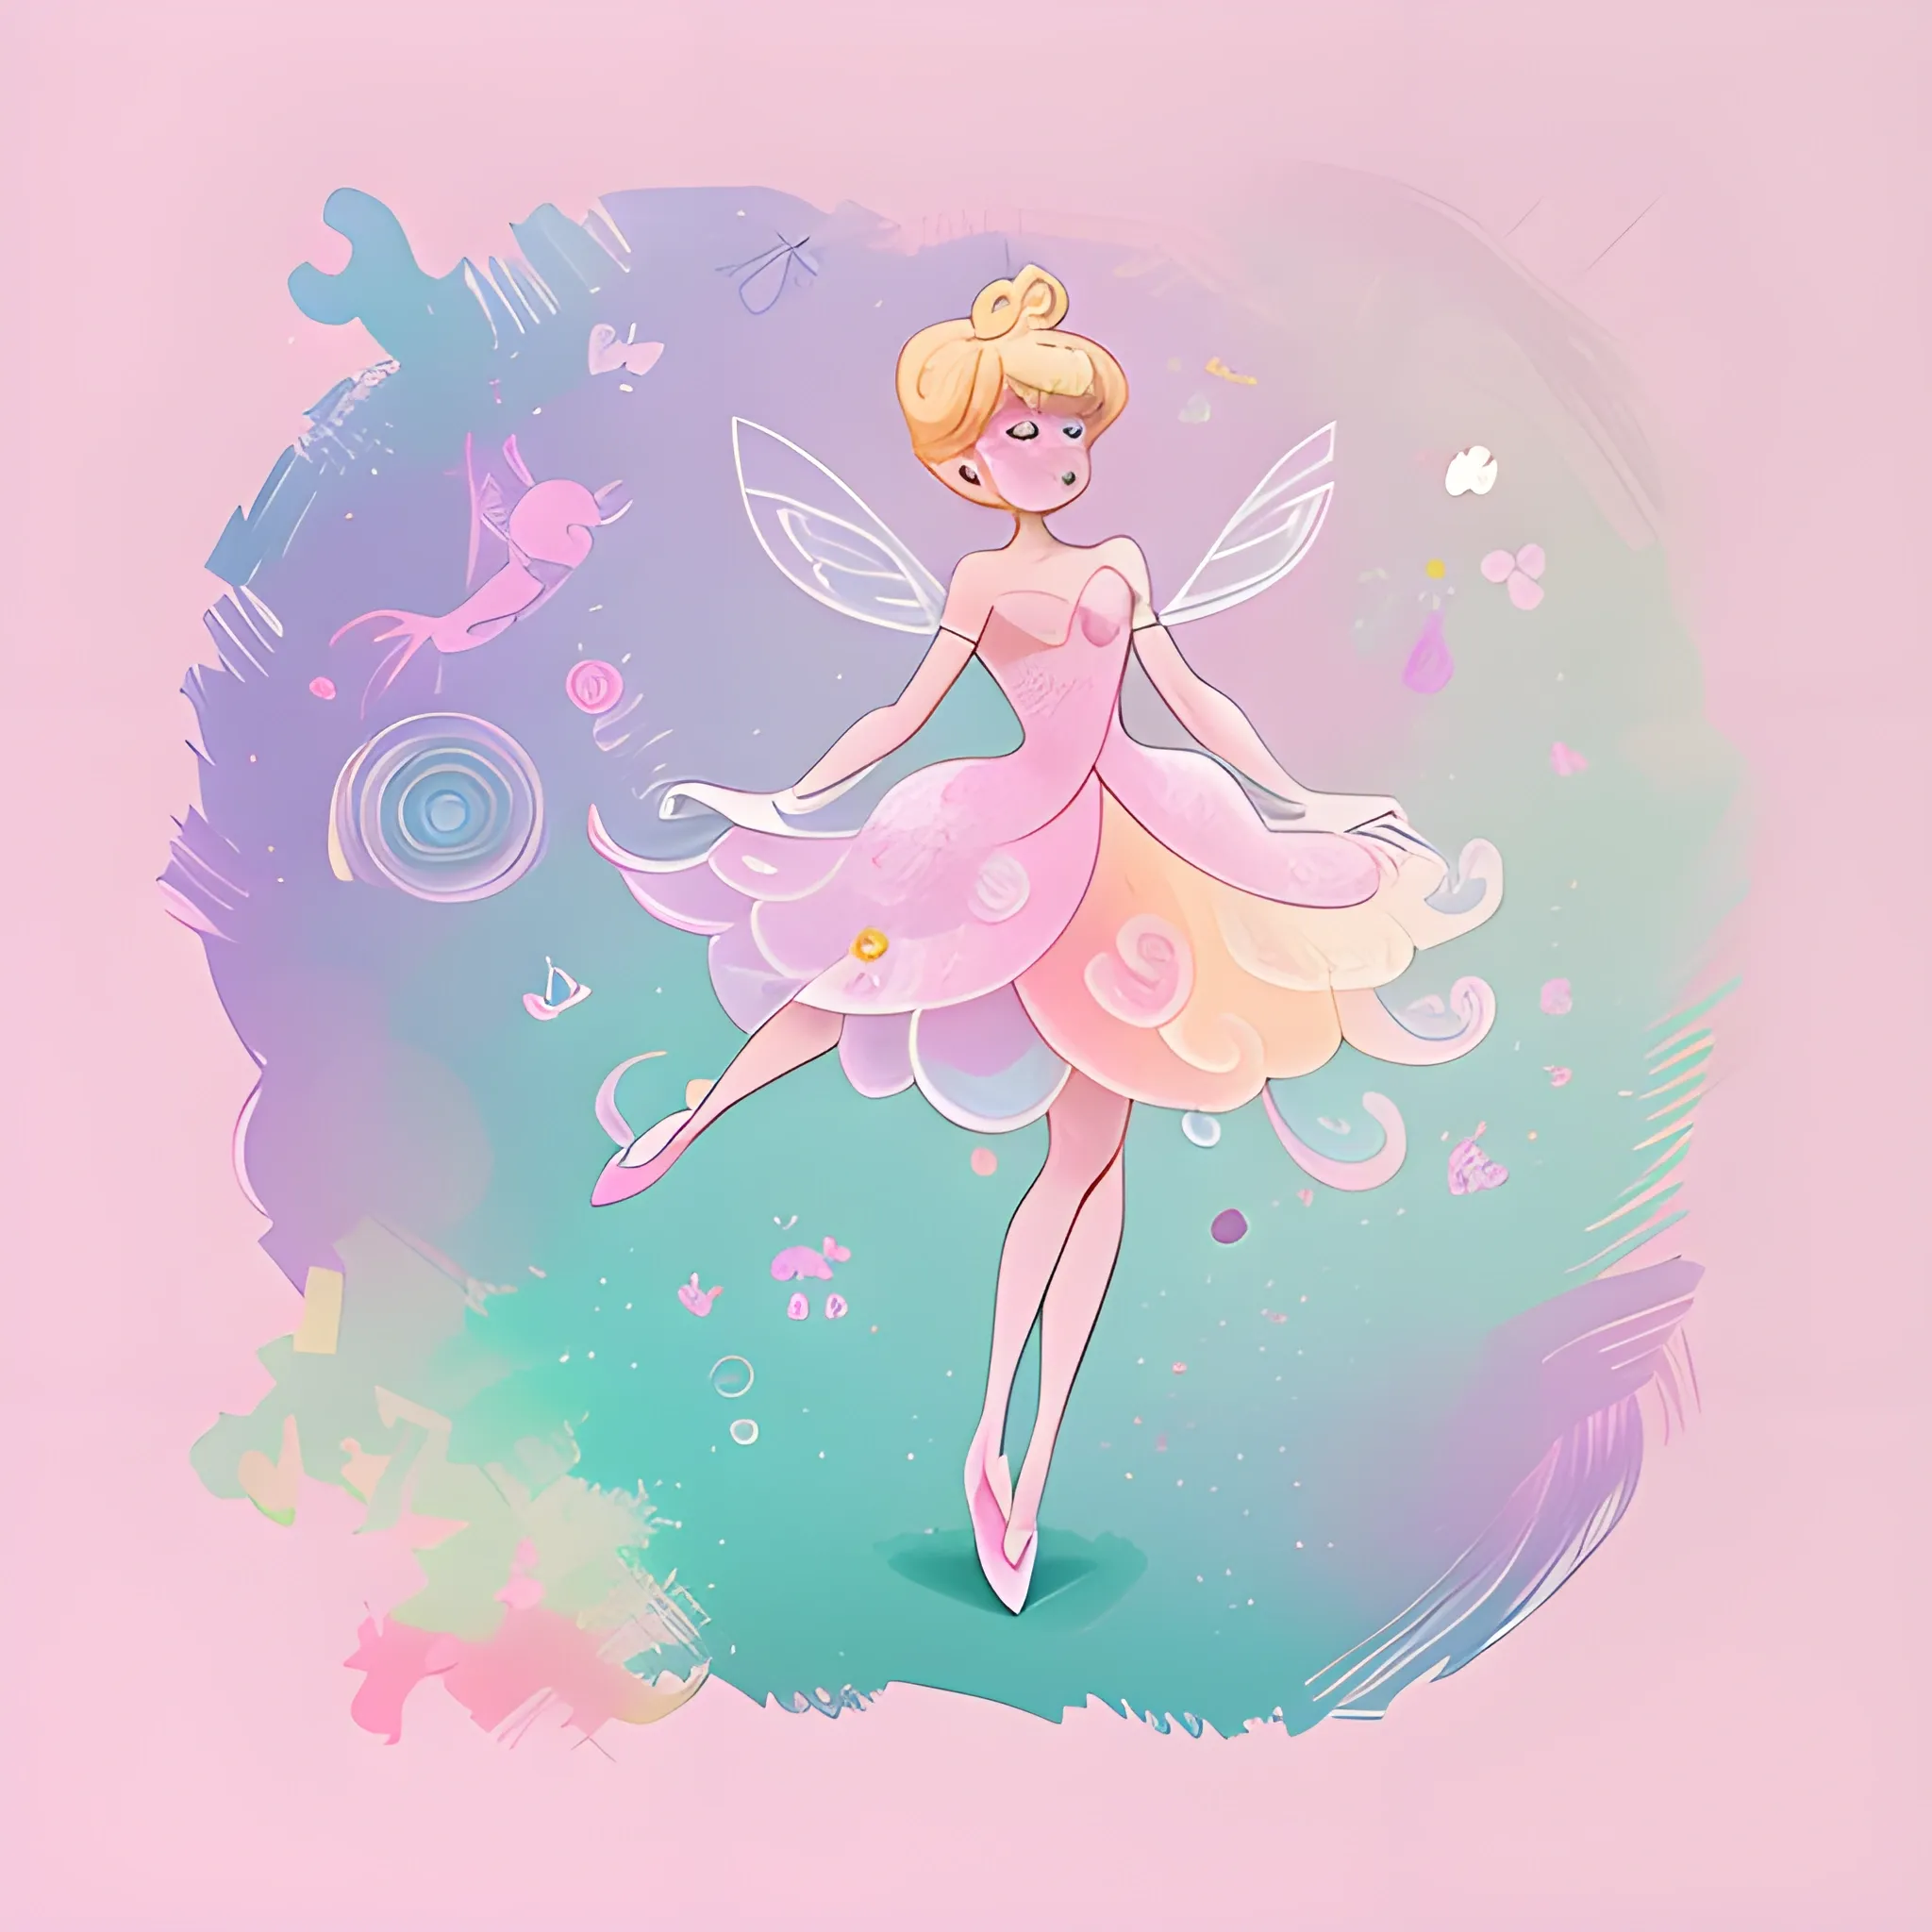 chaotic artwork using tinker bell animation movie element in pastel colour scheme. soft focus print designs. Evelyn Tan art style

graphic, animated, characters, 